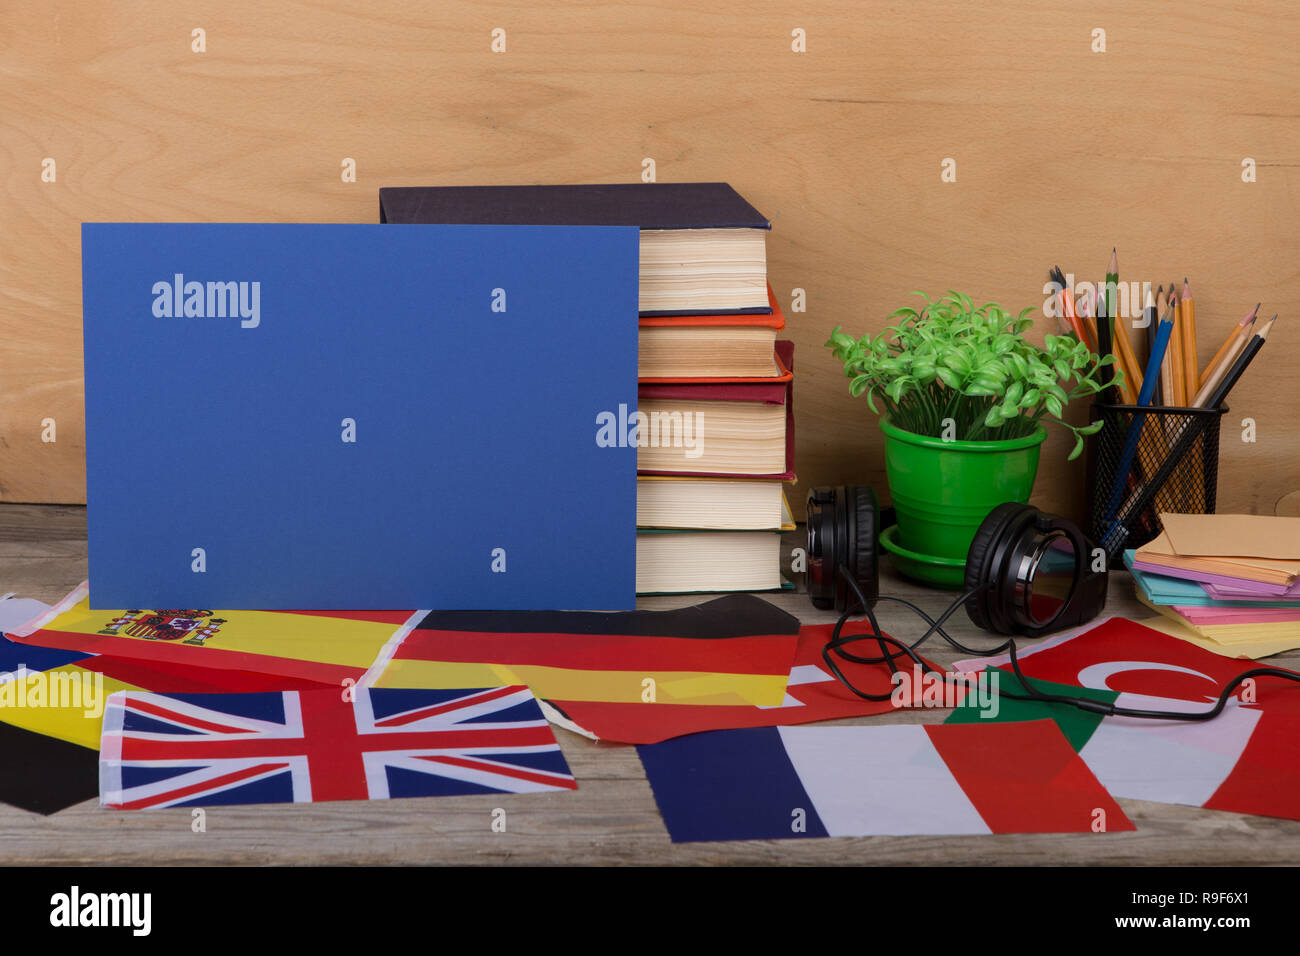 Learning languages concept - blank paper, flags, books, headphones, pencils on wooden background Stock Photo